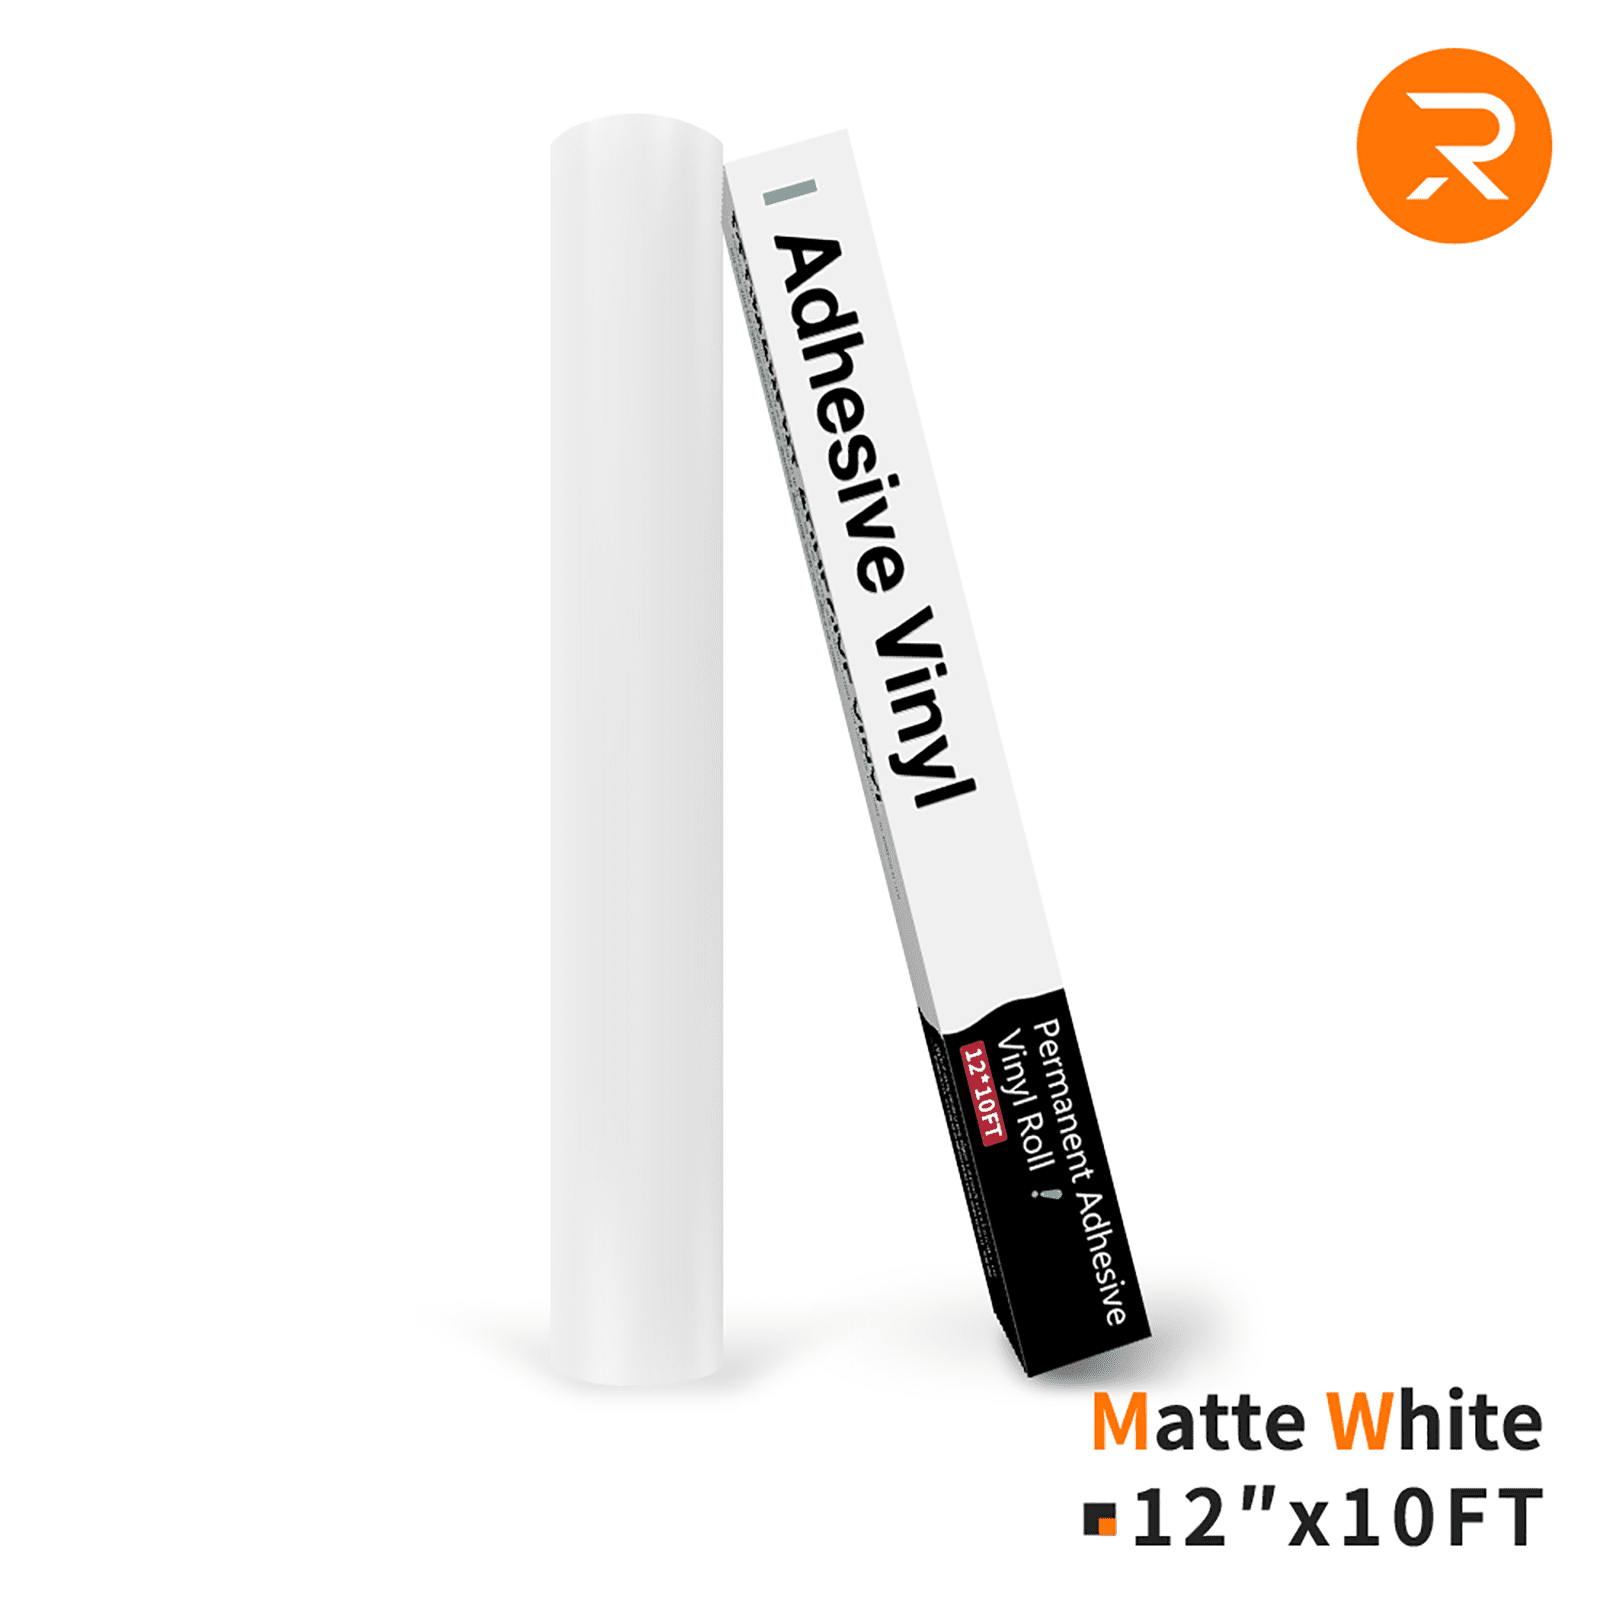 Matte White Vinyl Adhesive Roll 12 by 15 FEET, Permanent White Vinyl for  Automotive, Signs, Scrapbooking, Cricut, Silhouette Cameo, Plotters and Die  Cutters by Turner Moore Edition 